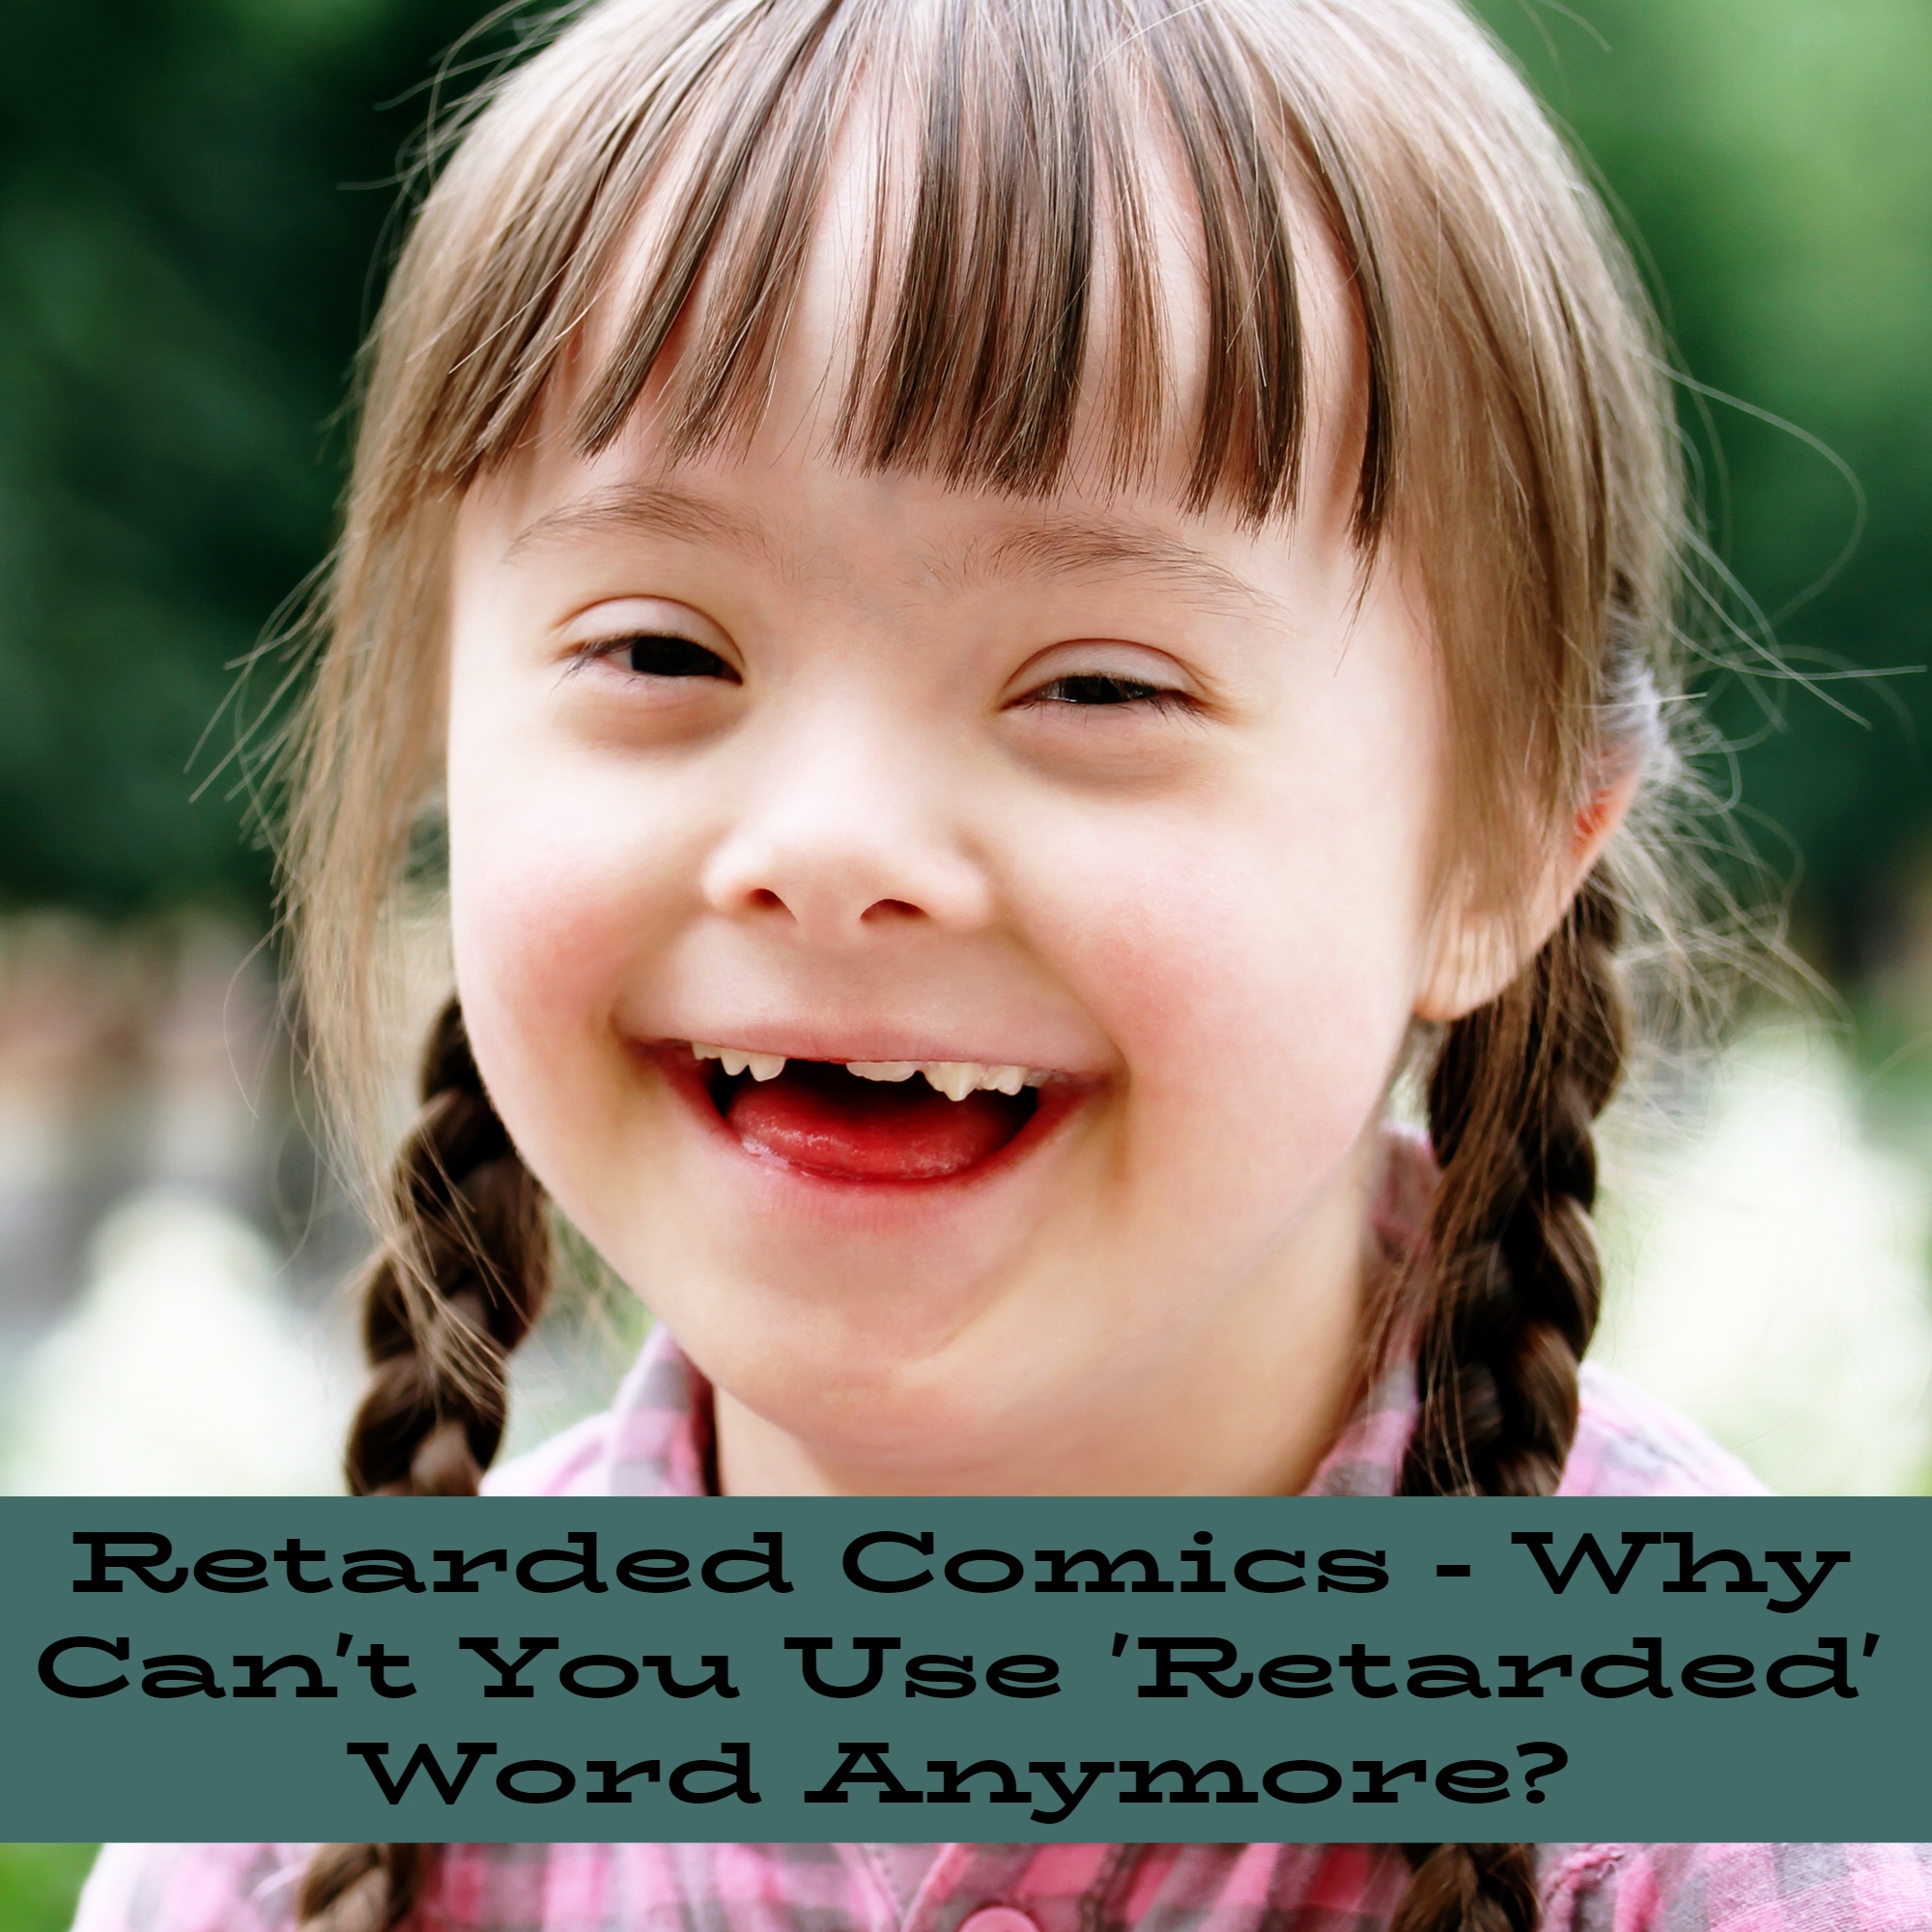 Retarded Comics - Why Can't You Use The Word 'Retarded' Anymore?